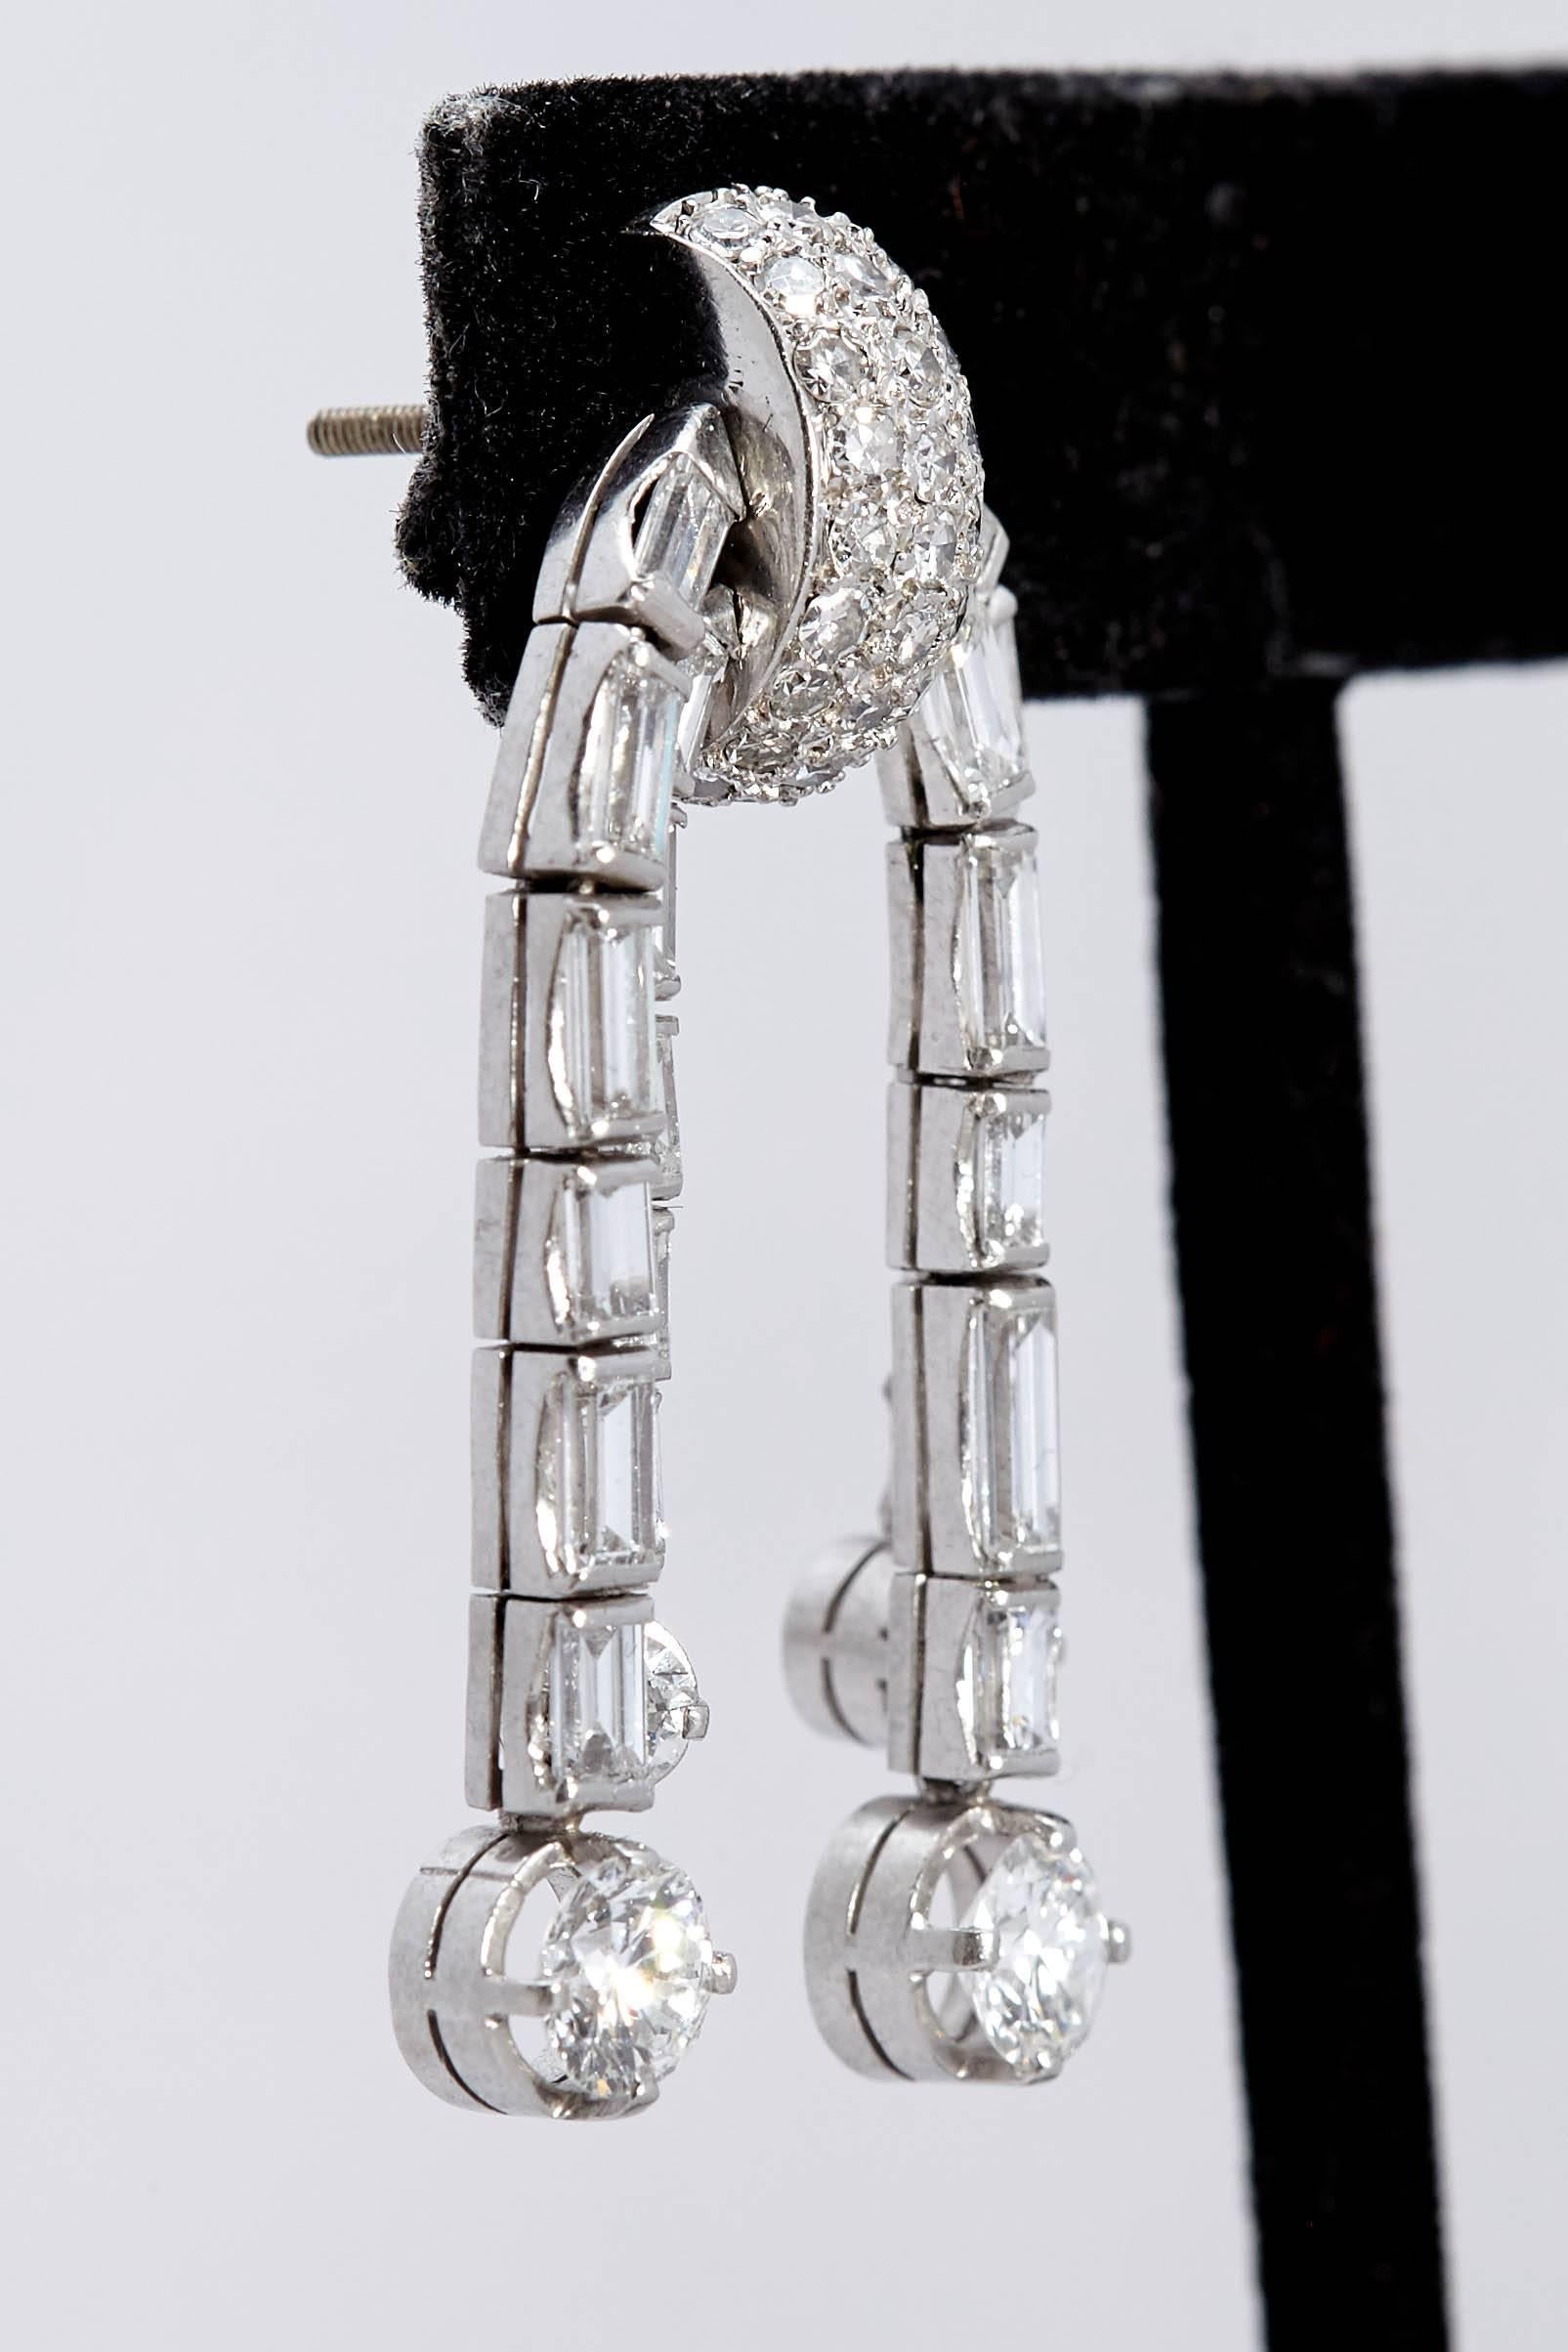 A pair of beautiful ear-pendants with baguette and round cut diamonds, mounted in platinum. Made in Italy, circa 1930s